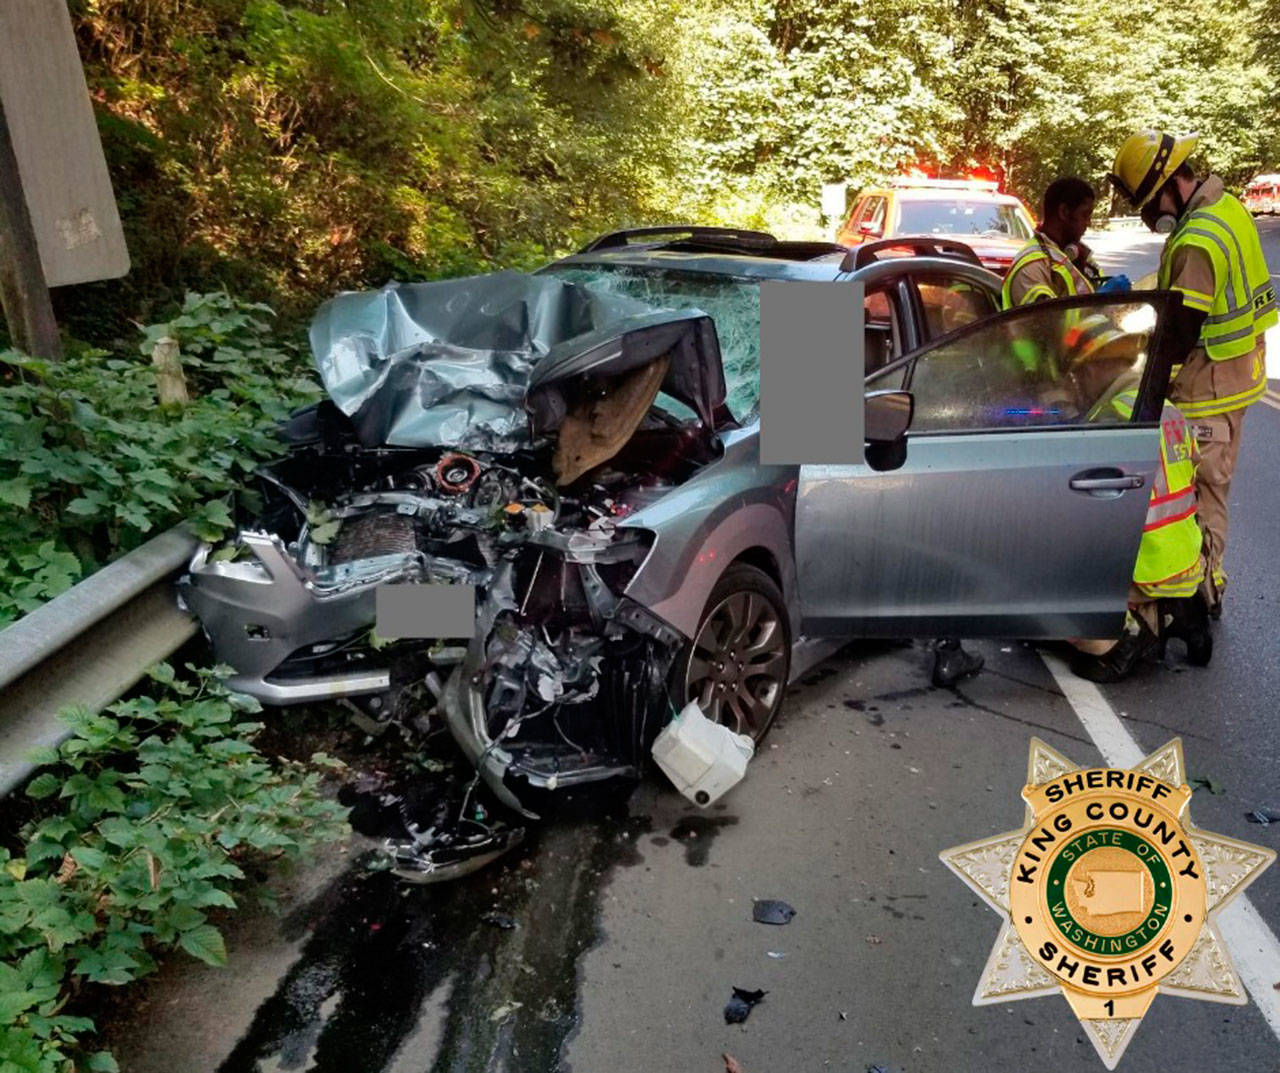 The 60-year-old driver of the smashed Subaru has been taken into custody for investigation of vehicular homicide. Photo courtesy of KCSO